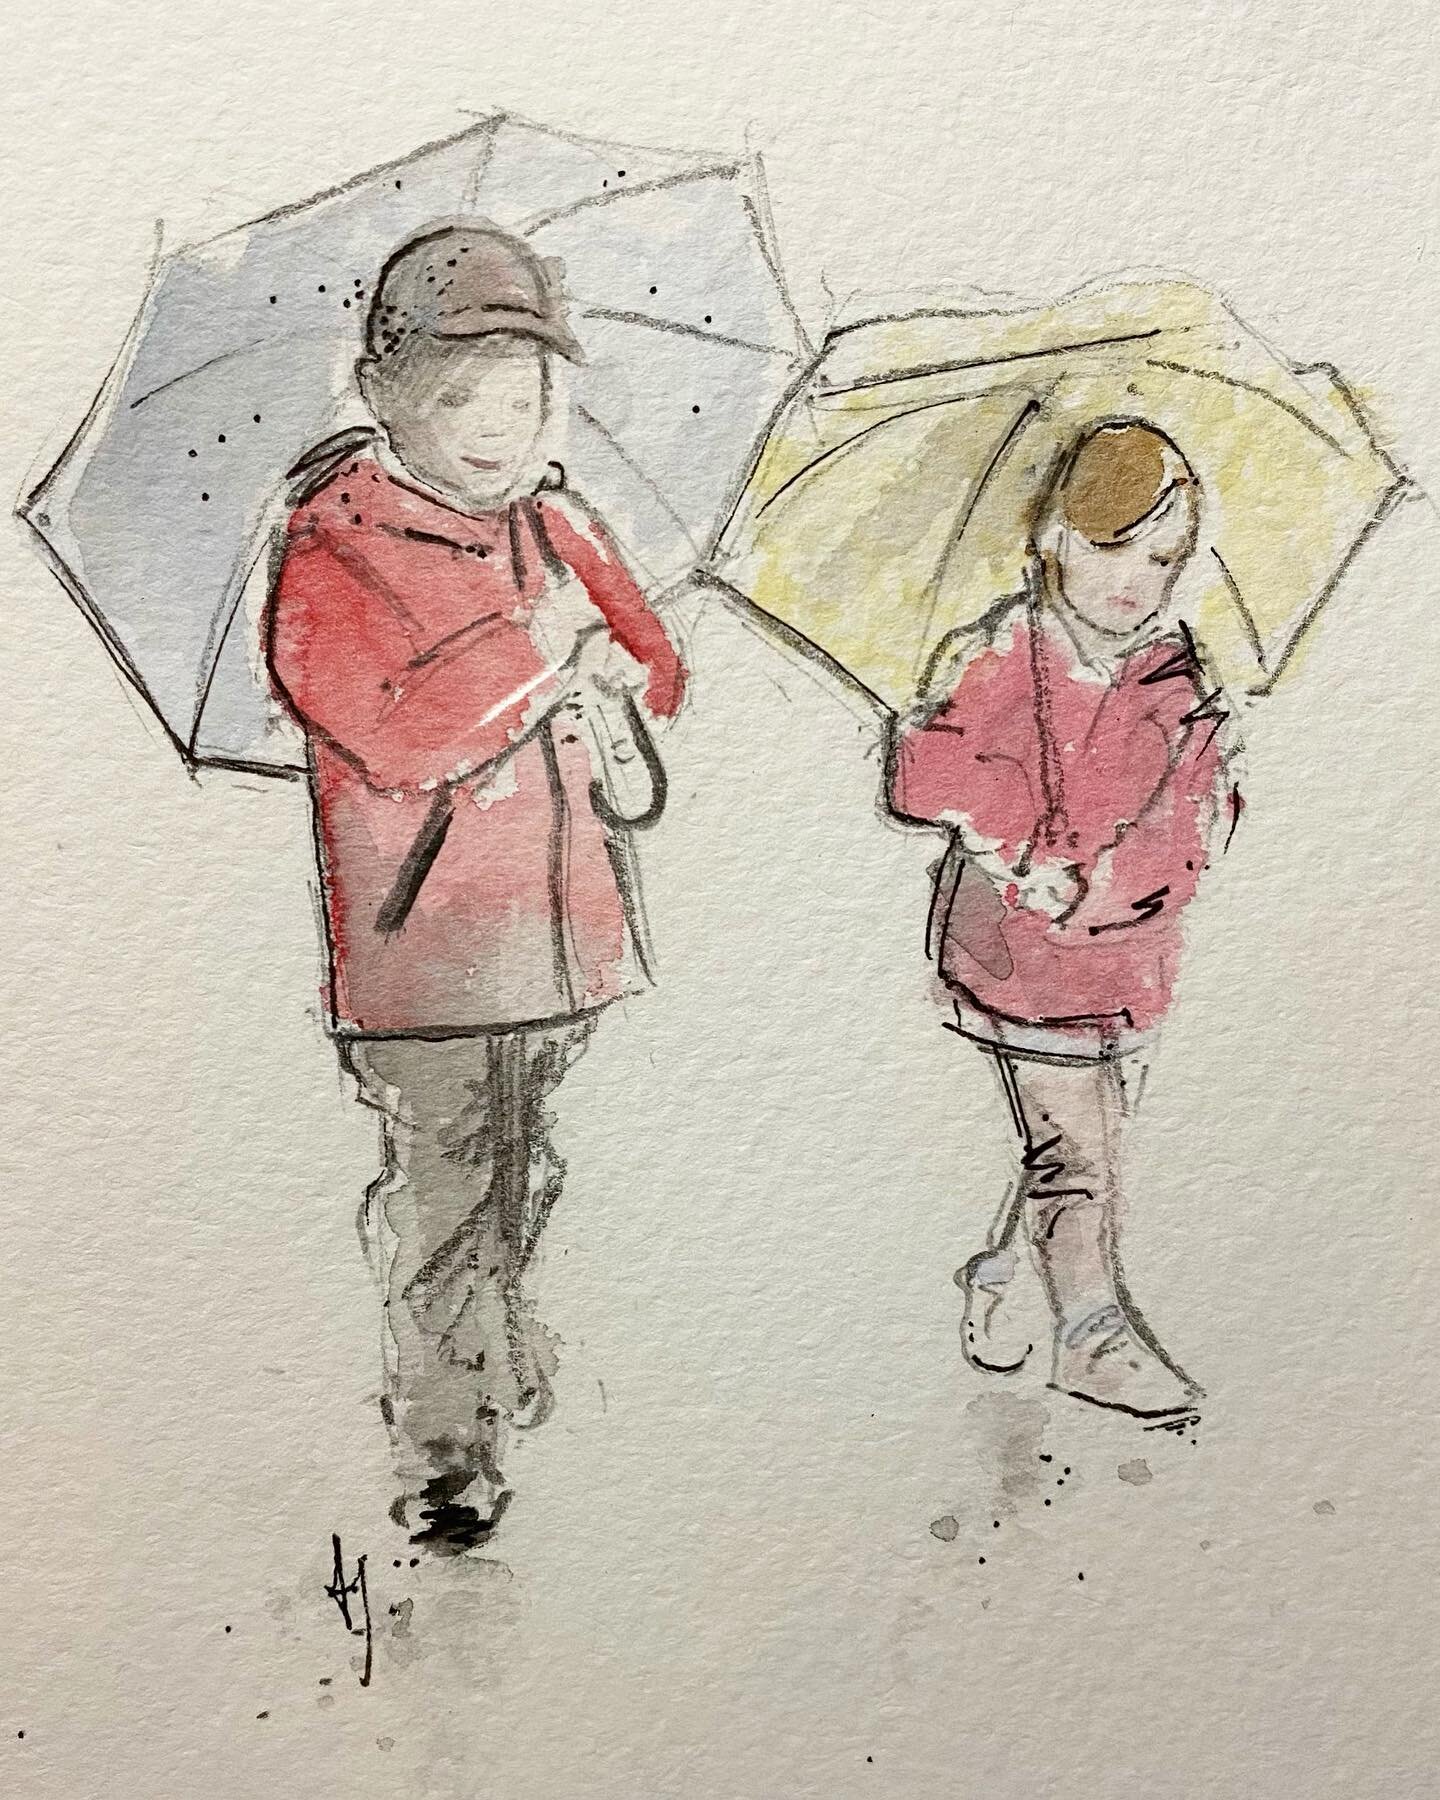 It&rsquo;s the little things we want to be reminded of as they grow older ❤️
*
*
*
*
*
#illustration #illustrator #drawing #sketch #portrait #childrensportraits #childillustration #art #artist #artistsoninstagram #illustratorsoninstagram #watercolour